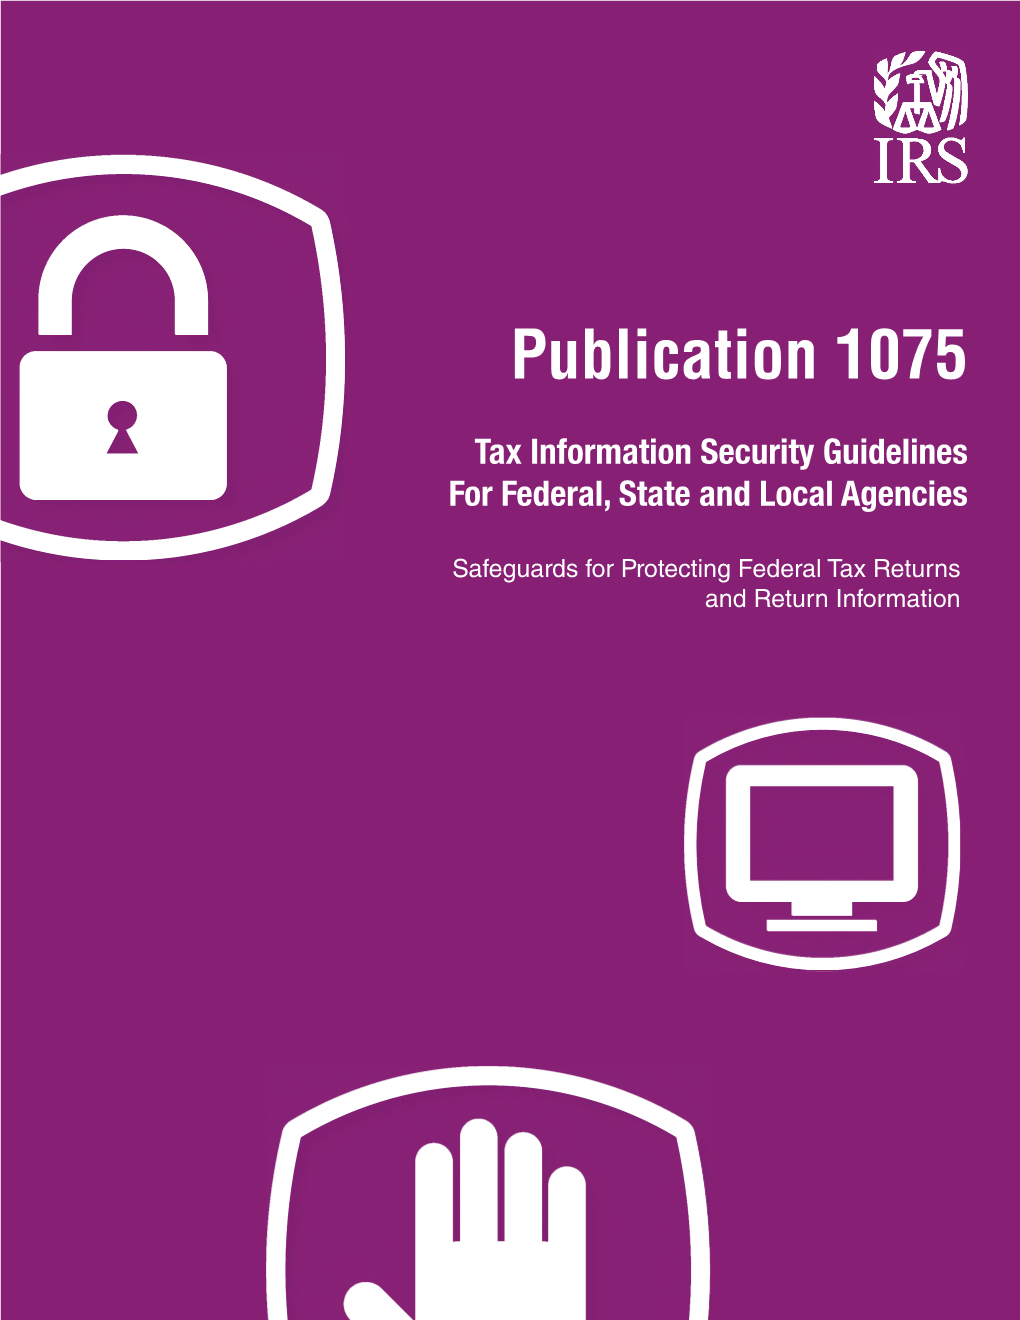 IRS Publication 1075, Tax Information Security